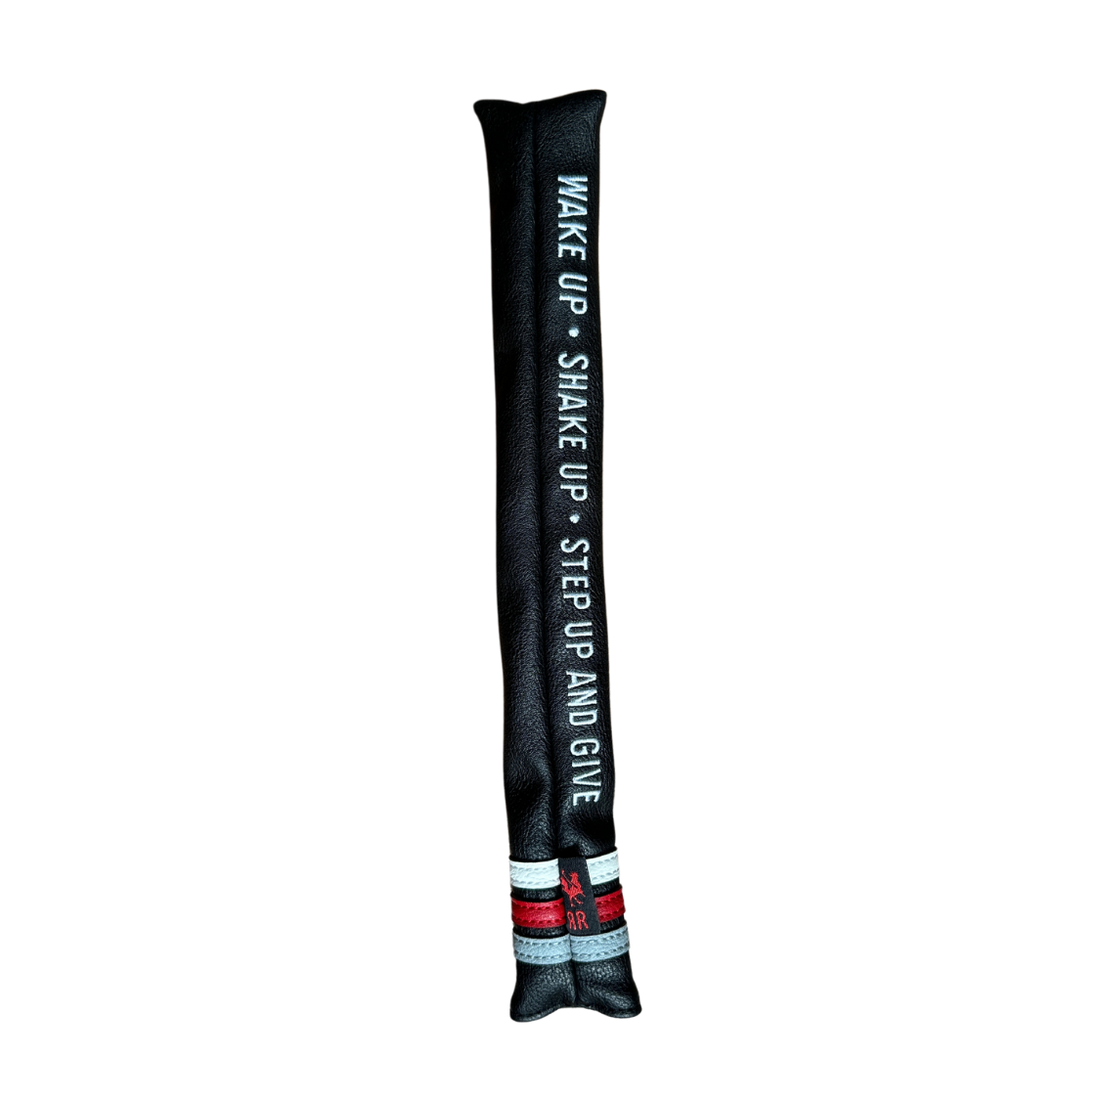 Alignment Stick - The Hideaway (Black)